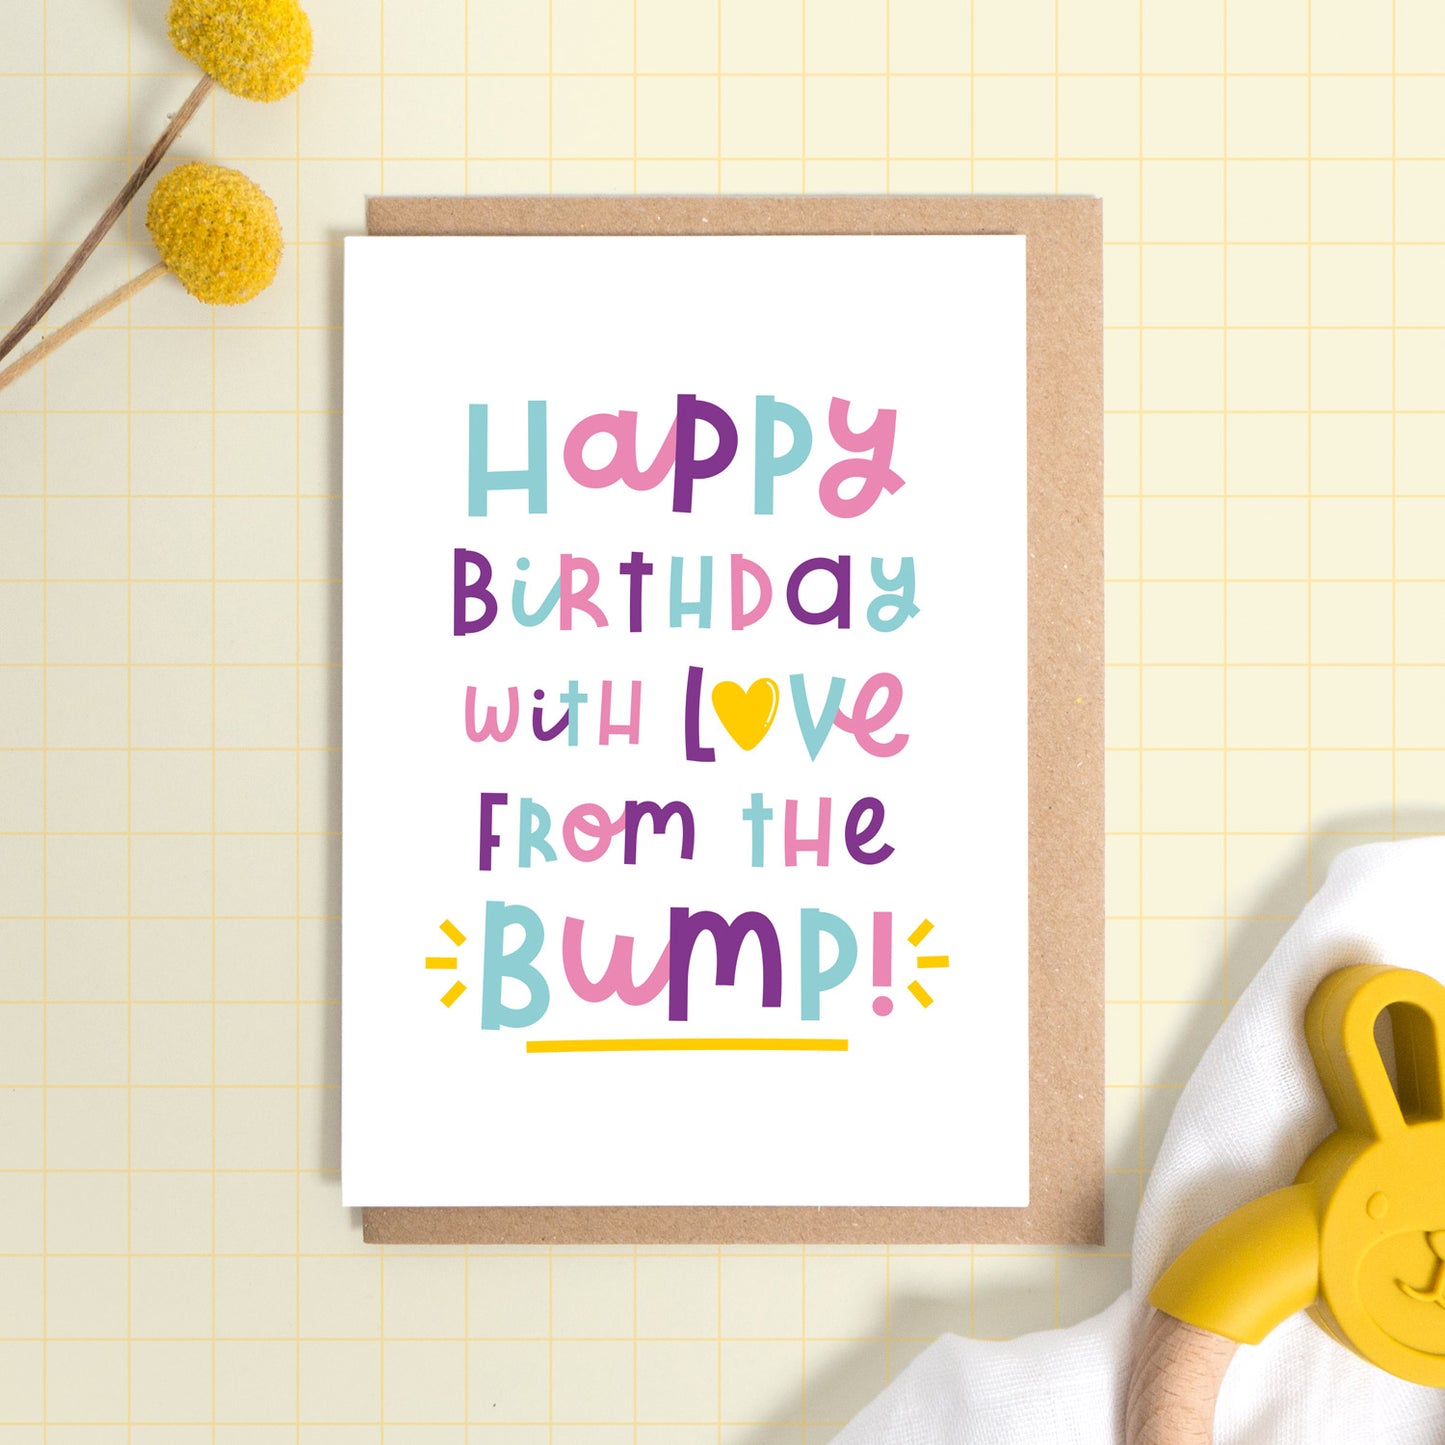 A happy birthday from the baby bump card set on a yellow background with some yellow flowers a muslin cloth and a baby soother. This is the version of the card in pink, purple and blue.